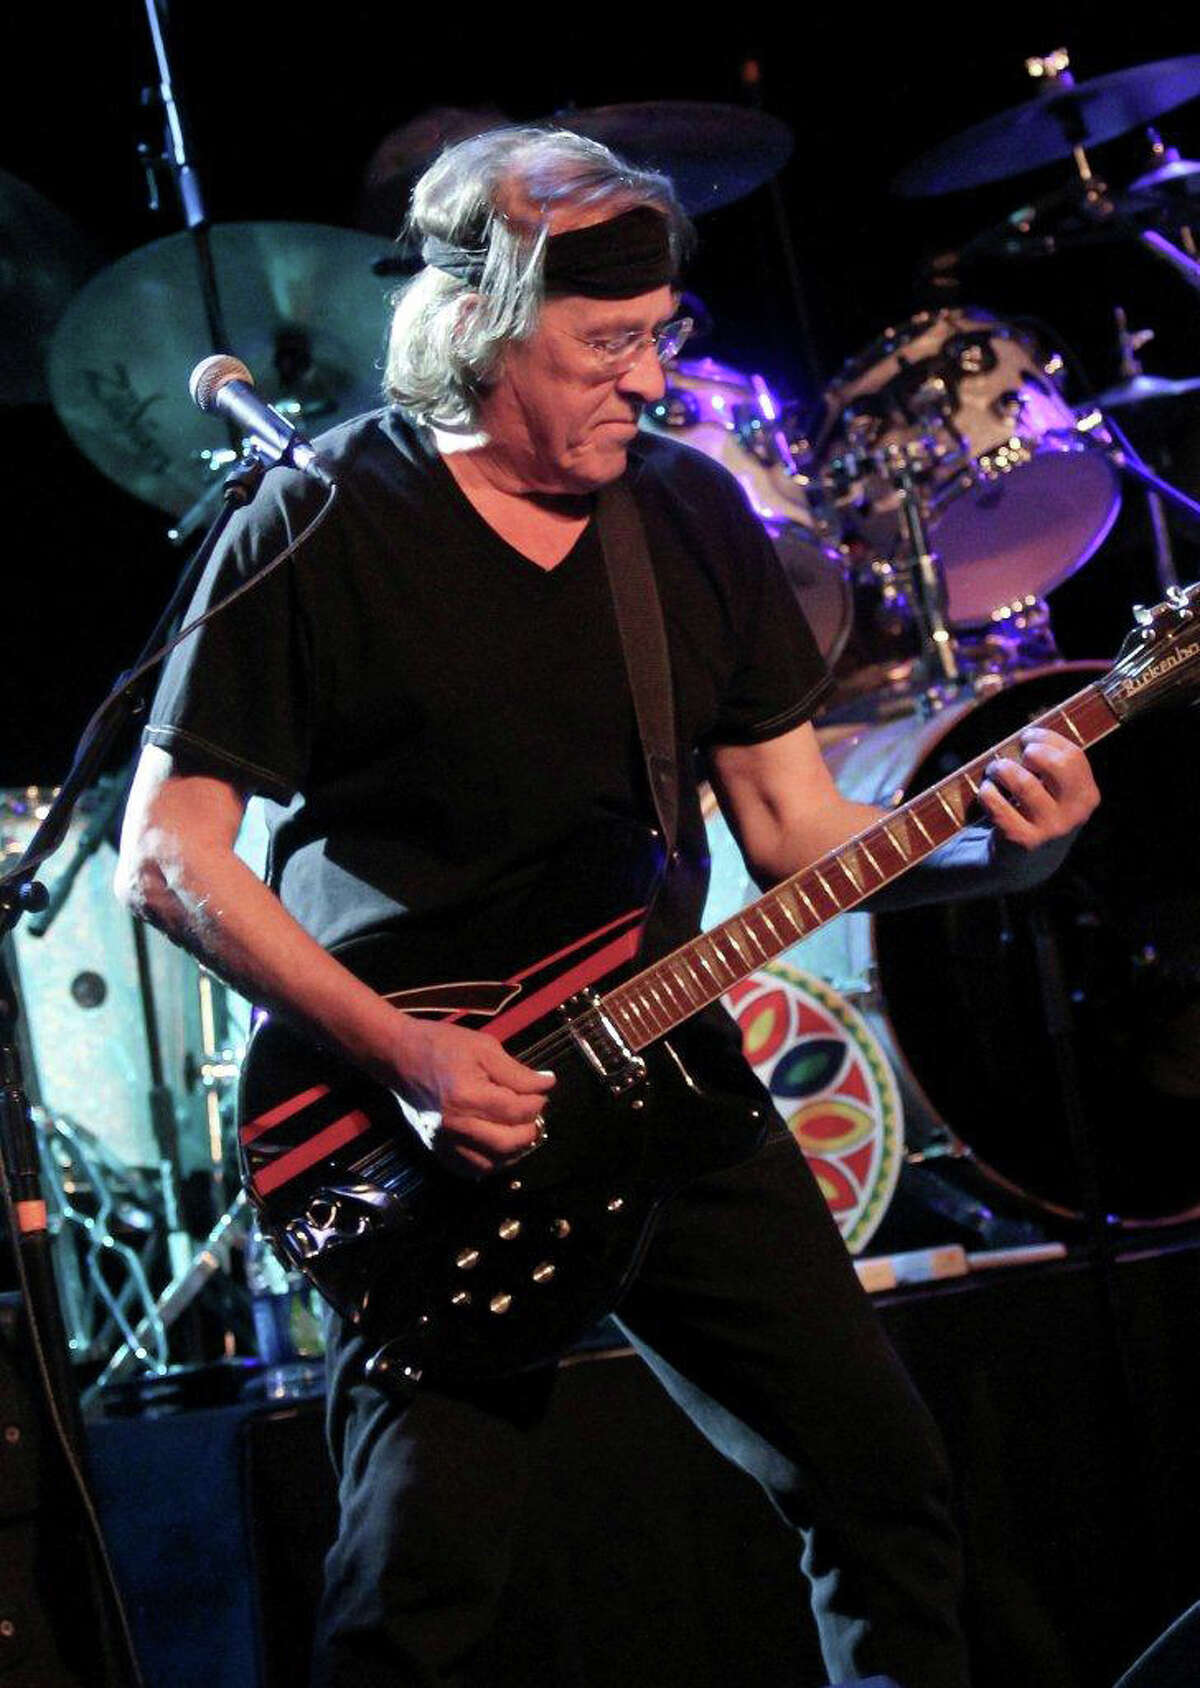 Rock 'n' Roll Hall of Famer Paul Kantner, of Jefferson Airplane, will celebrate his 71st birthday with a concert at The Ridgefield Playhouse on Thursday, March 15. This is the group behind songs such as ìWhite Rabbitî and ìSomebody to Love.î Kantner was the principal songwriter. He will be joined by his Jefferson Airplane band mates, along with David Freiberg, Slick Aguilar, Nona Hendryx and others. Call 203-438-5795 for tickets or visit ridgefieldplayhouse.org.